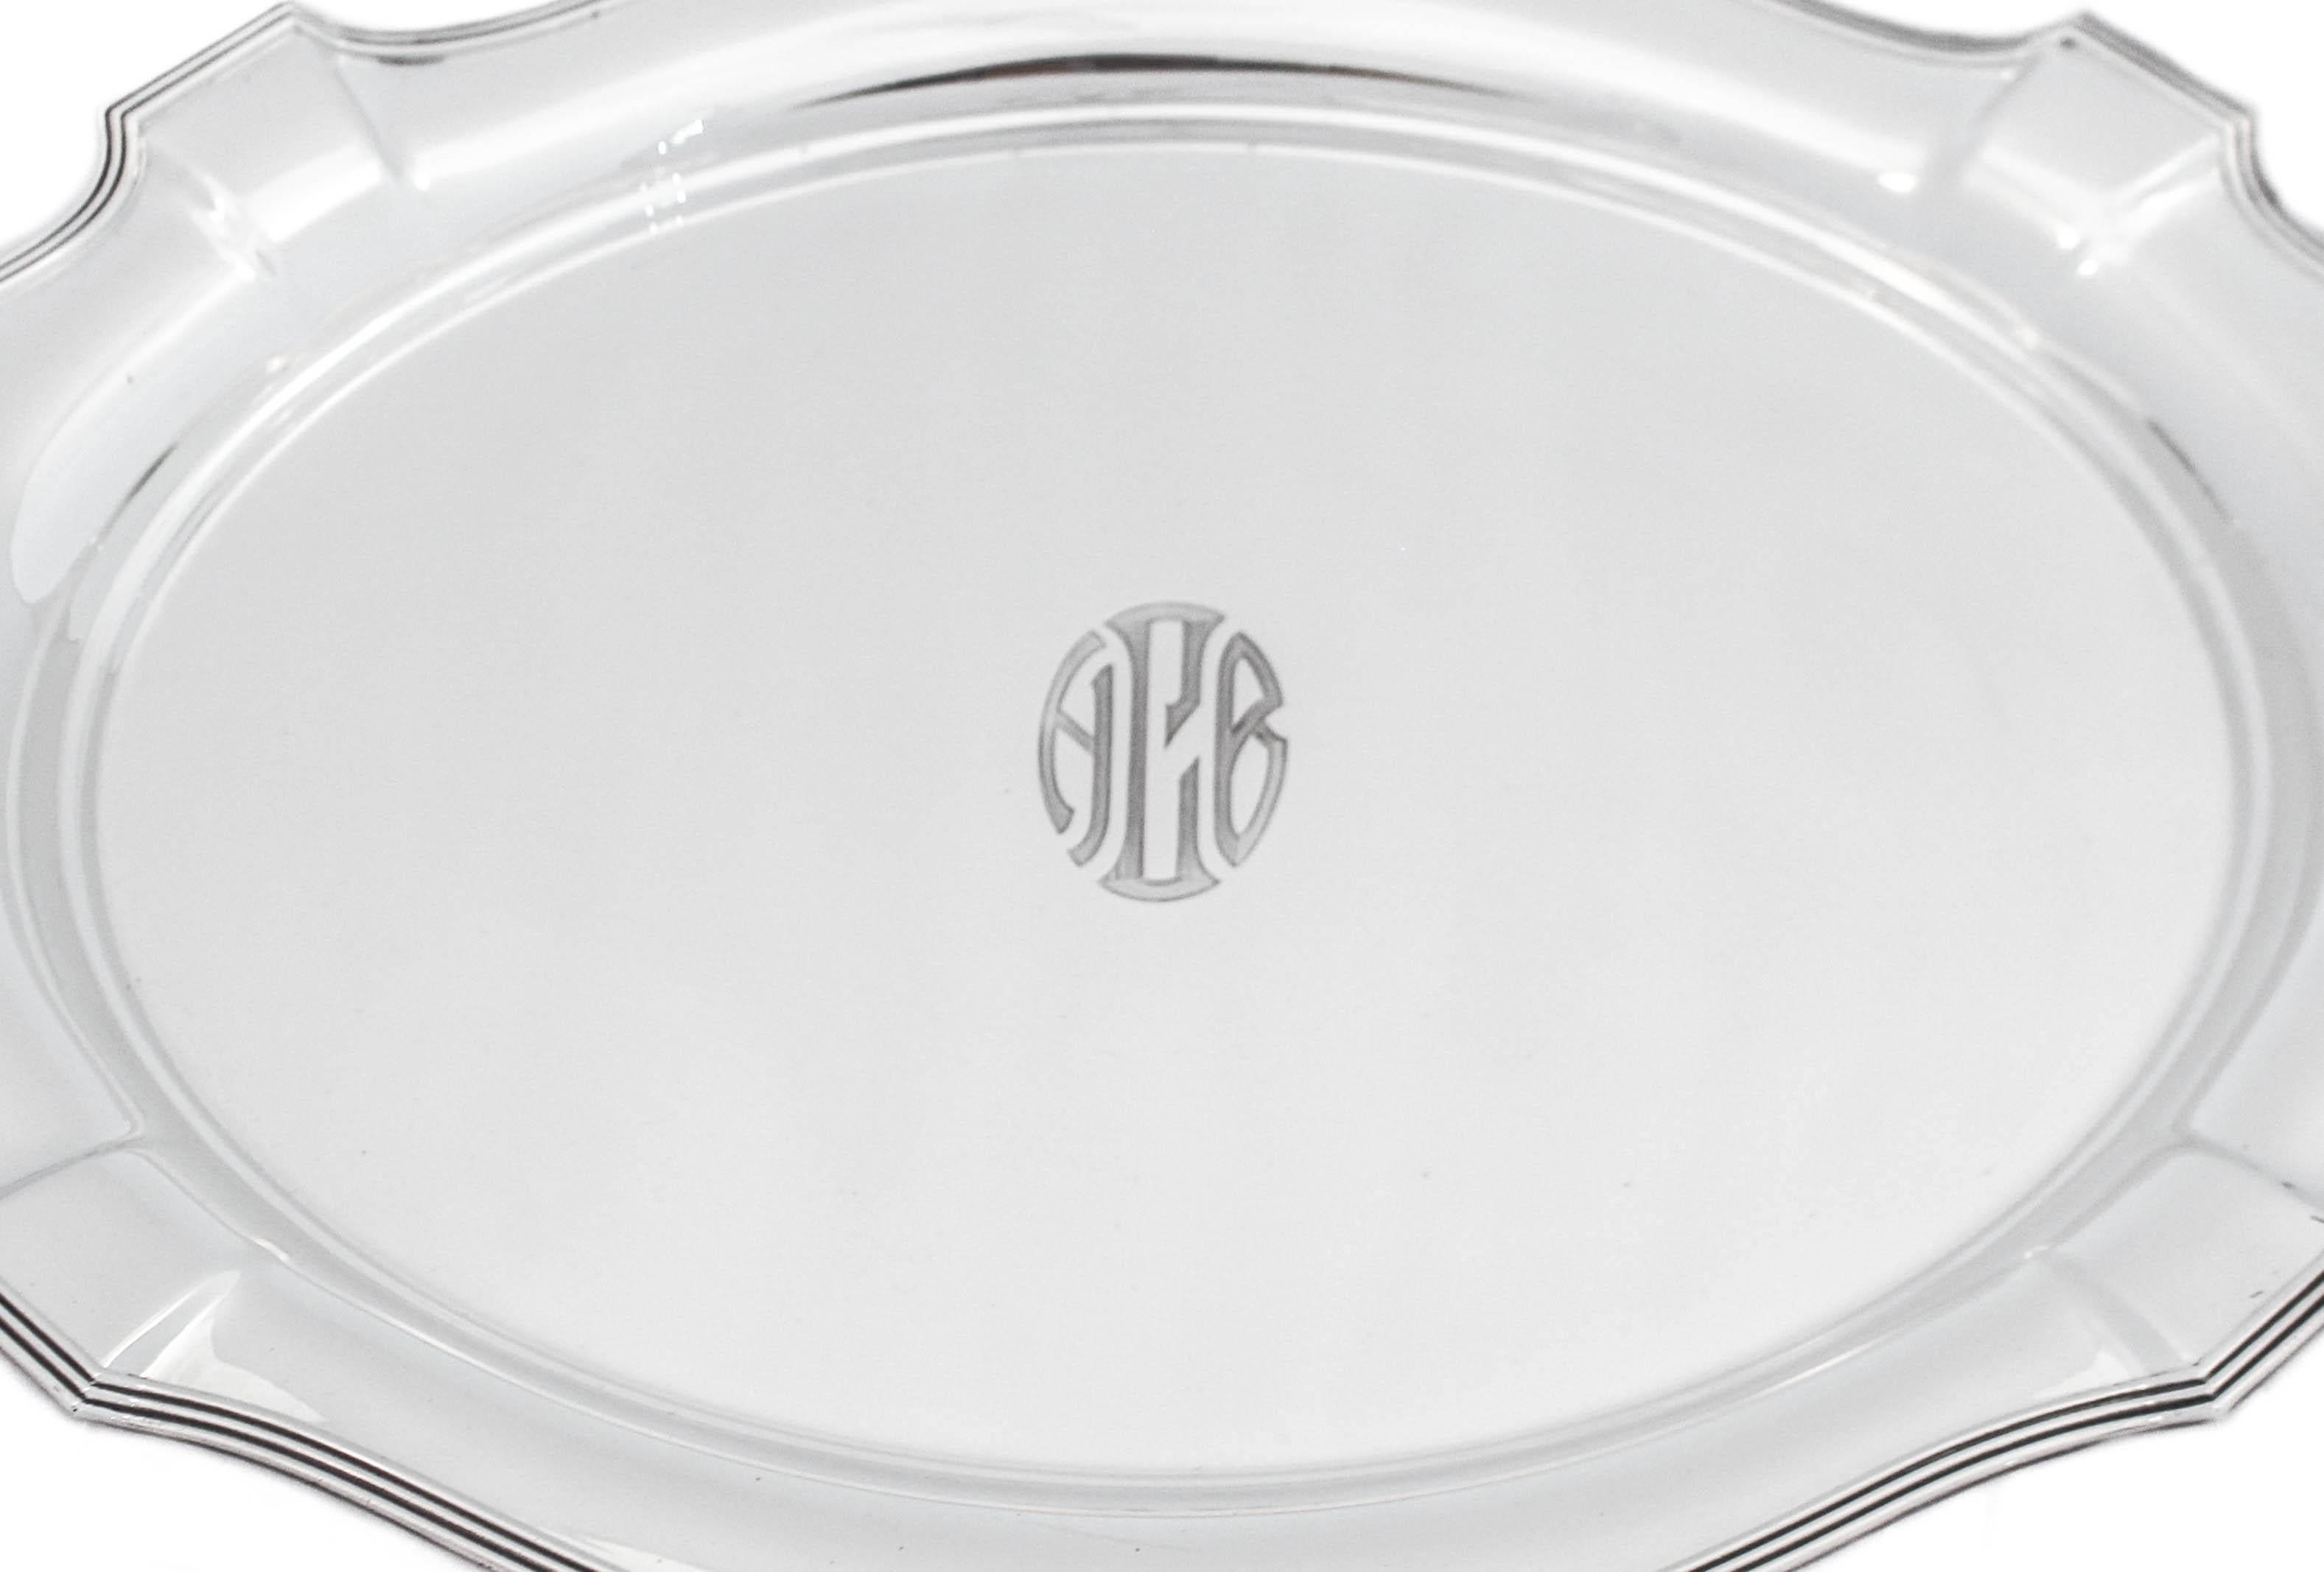 We are happy to offer you this sterling silver tray made by Gorham Silversmiths, hallmarked 1927. Designed in the iconic “Plymouth” pattern, this tray has been restored to it’s original glory; dents and dings removed, scratches buffed out. Other